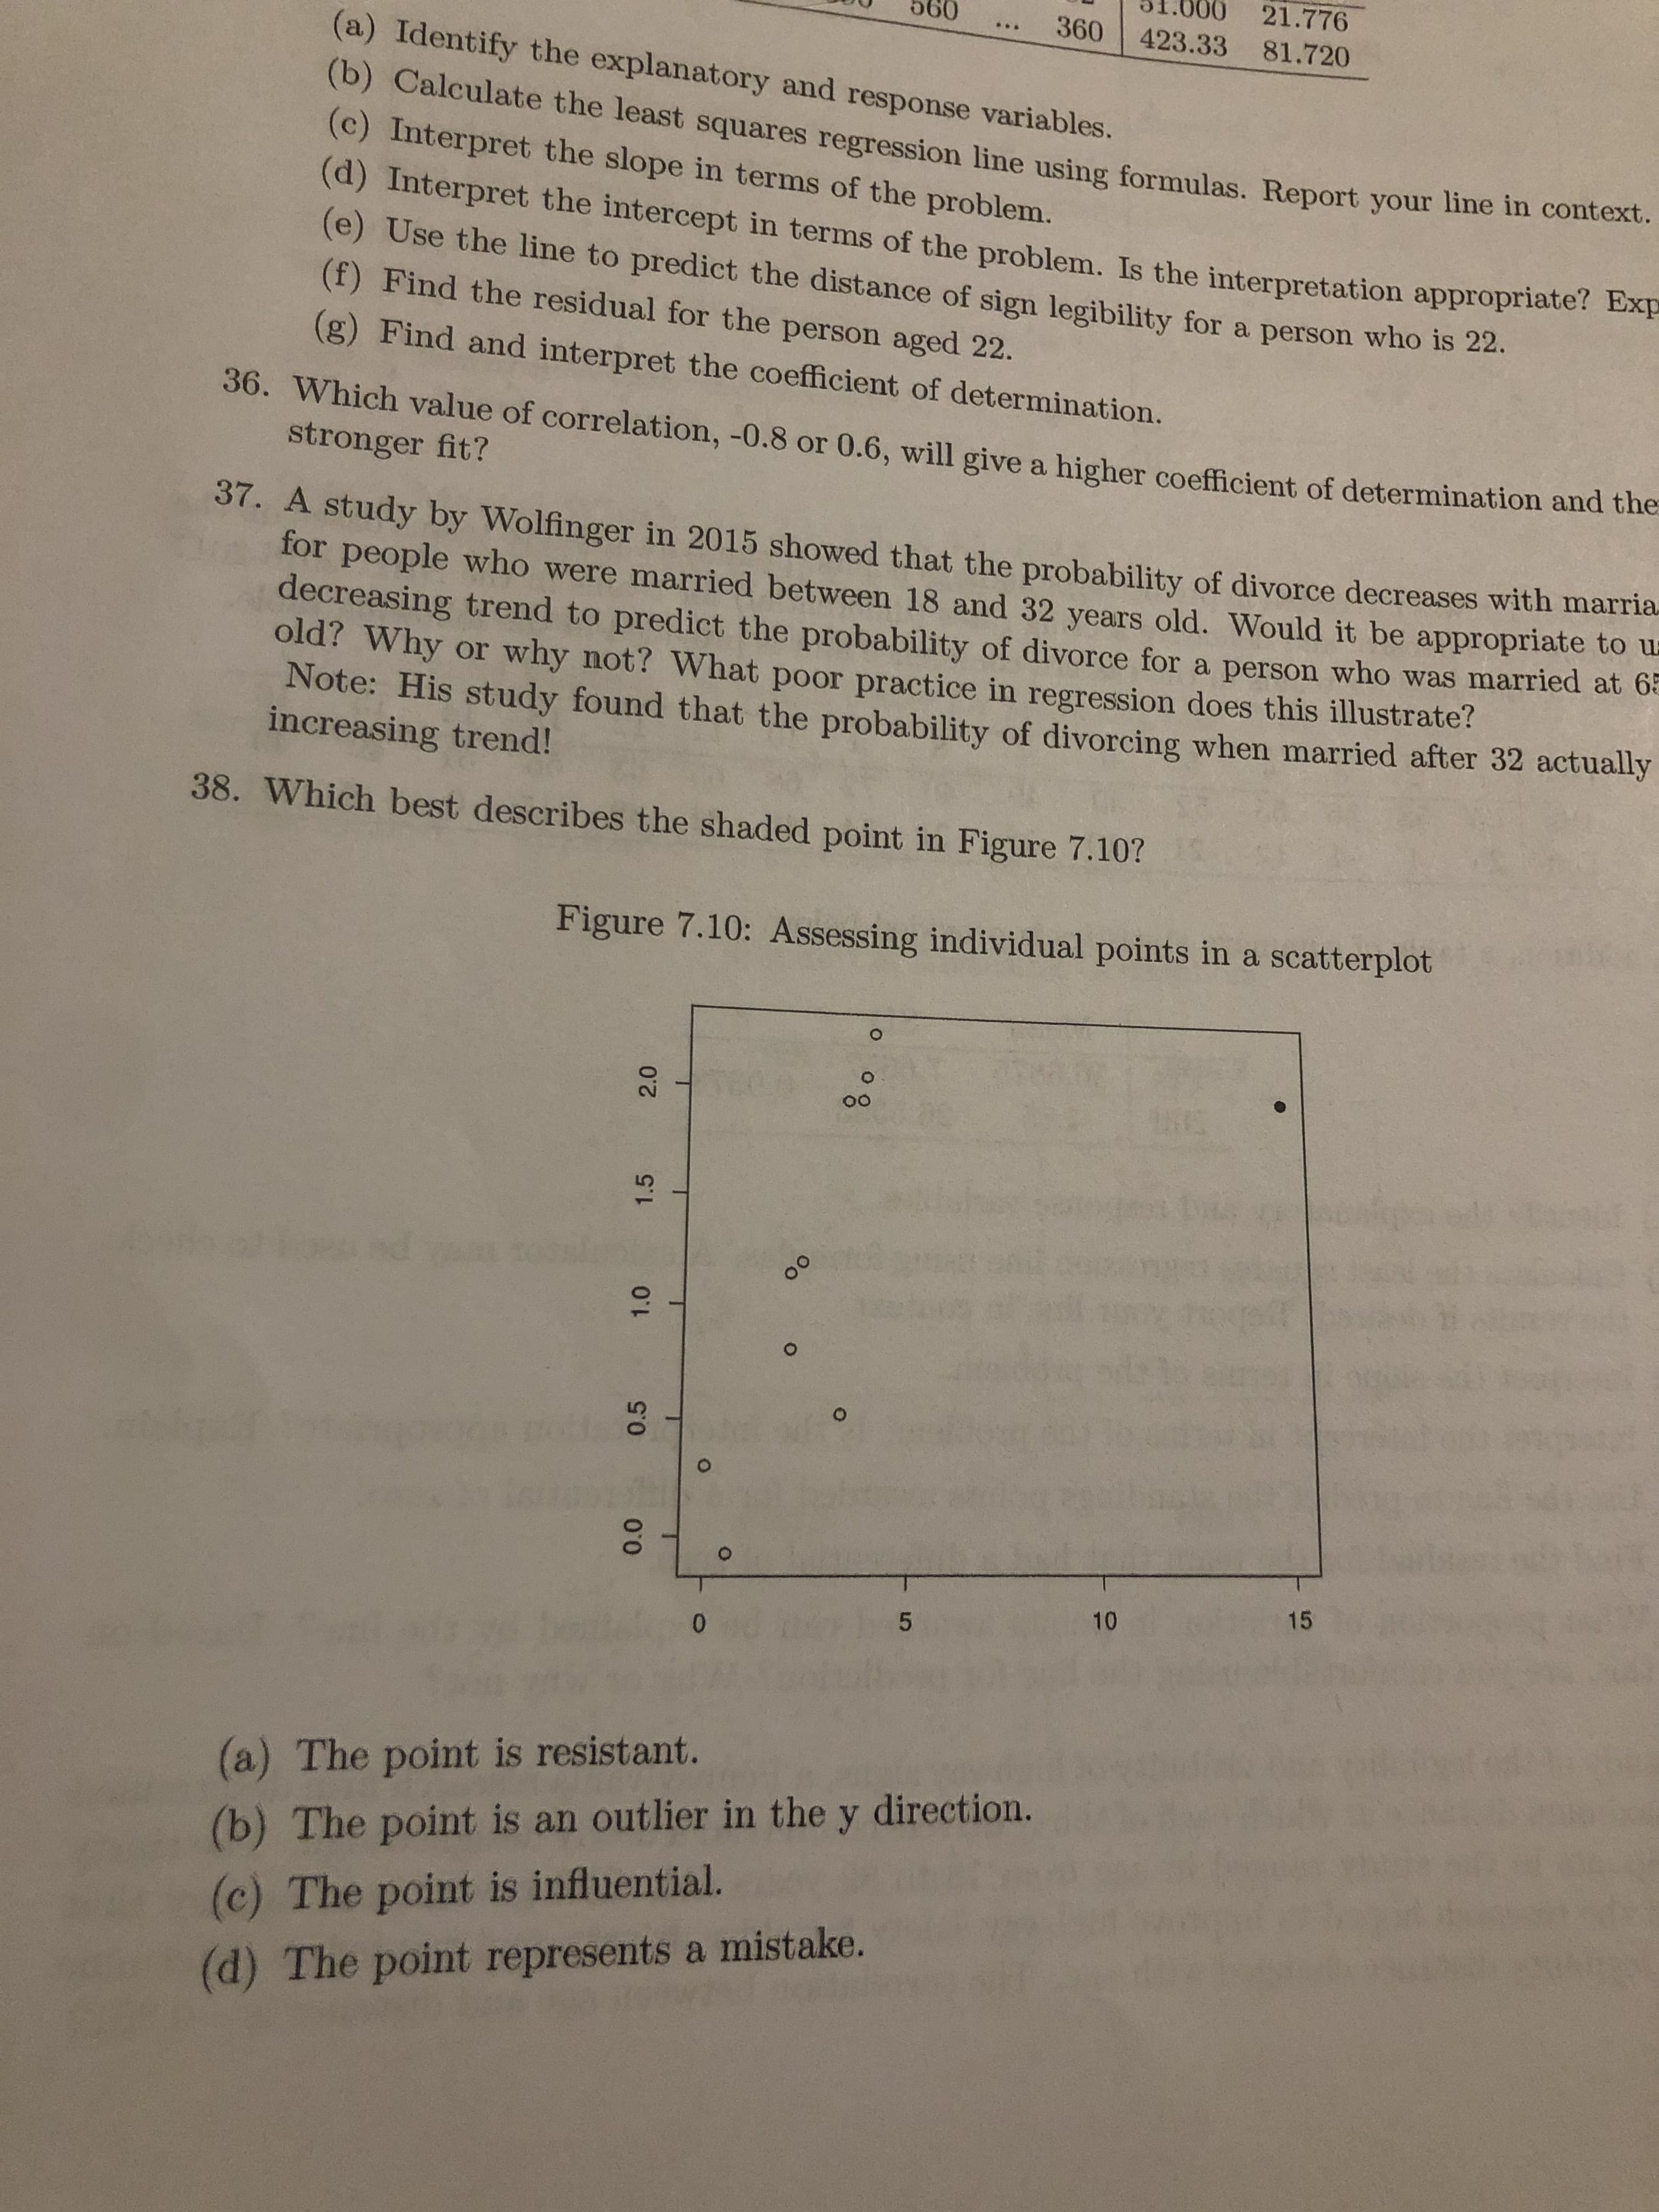 21.776
423.33 81.720
090
360
...
(a) Identify the explanatory and response variables.
(b) Calculate the least squares regression line using formulas. Report your line in context.
(c) Interpret the slope in terms of the problem.
(d) Interpret the intercept in terms of the problem. Is the interpretation appropriate? Exp
(e) Use the line to predict the distance of sign legibility for a person who is 22.
(f) Find the residual for the person aged 22.
(g) Find and interpret the coefficient of determination.
36. Which value of correlation, -0.8 or 0.6, will give a higher coefficient of determination and the
stronger fit?
37. A study by Wolfinger in 2015 showed that the probability of divorce decreases with marria.
for people who were married between 18 and 32 years old. Would it be appropriate to u
decreasing trend to predict the probability of divorce for a person who was married at be
old? Why or why not? What poor practice in regression does this illustrate?
Note: His study found that the probability of divorcing when married after 32 actually
increasing trend!
38. Which best describes the shaded point in Figure 7.10?
Figure 7.10: Assessing individual points in a scatterplot
00
15
10
(a) The point is resistant.
(b) The point is an outlier in the y direction.
(c) The point is influential.
(d) The point represents a mistake.
0.0
0.5
1.0
1.5
2.0
